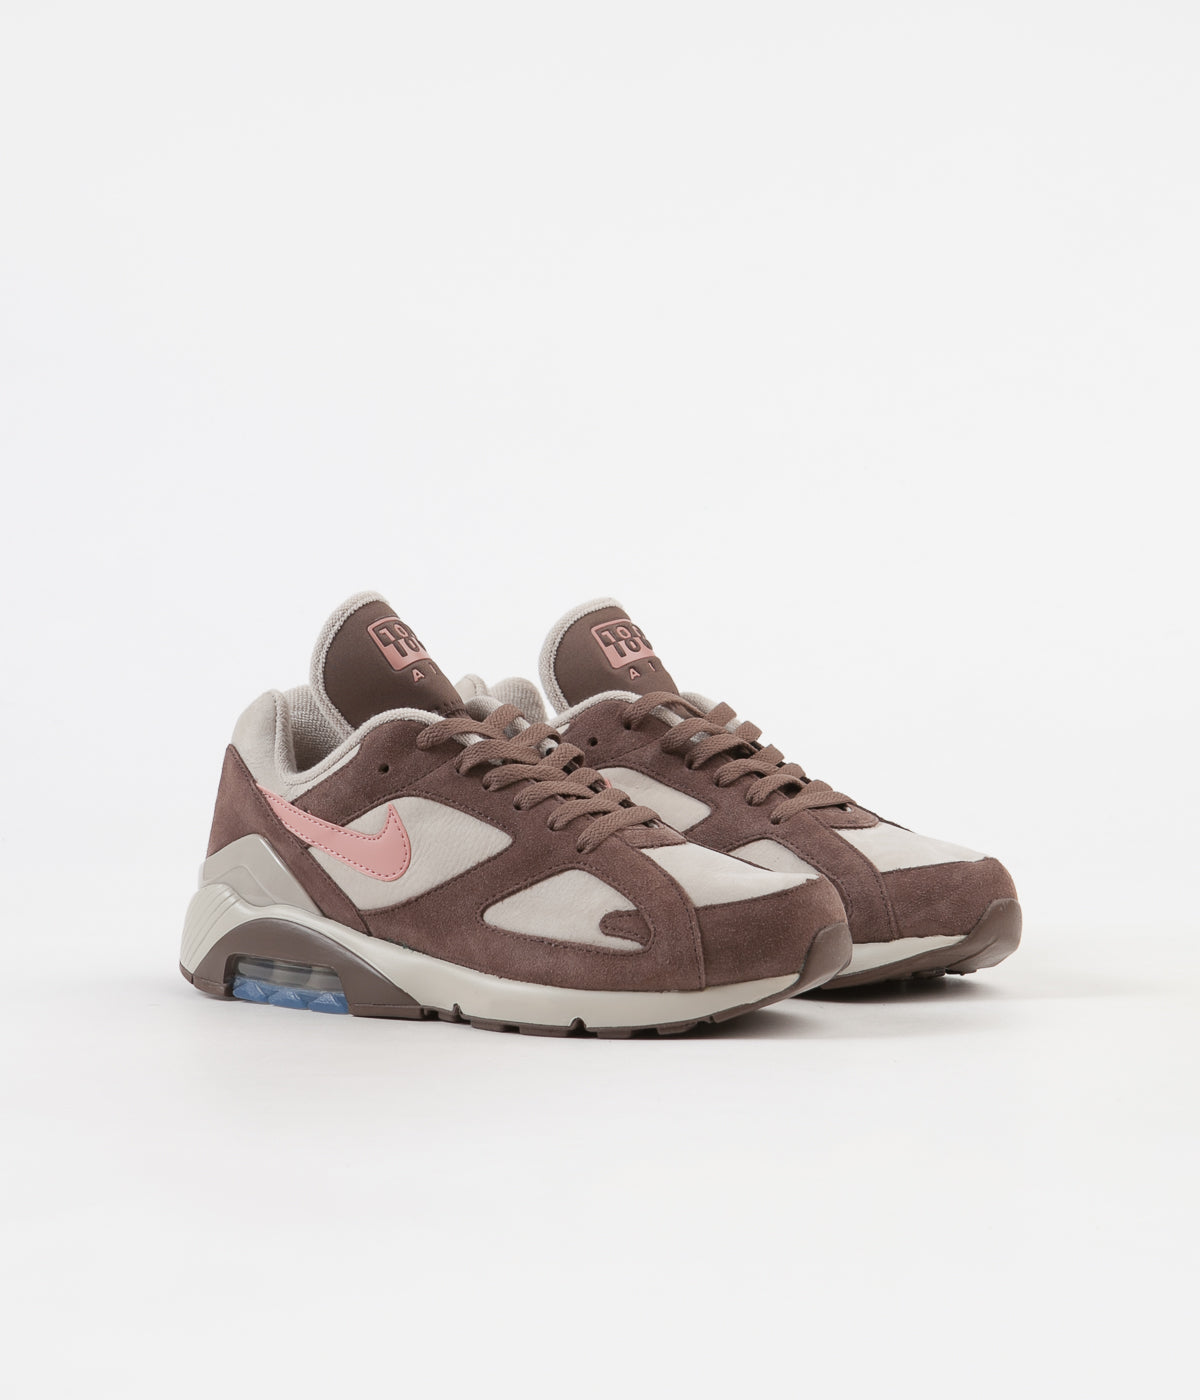 Air Max 180 Shoes - String / Pink - Baroque Brown Always in Colour